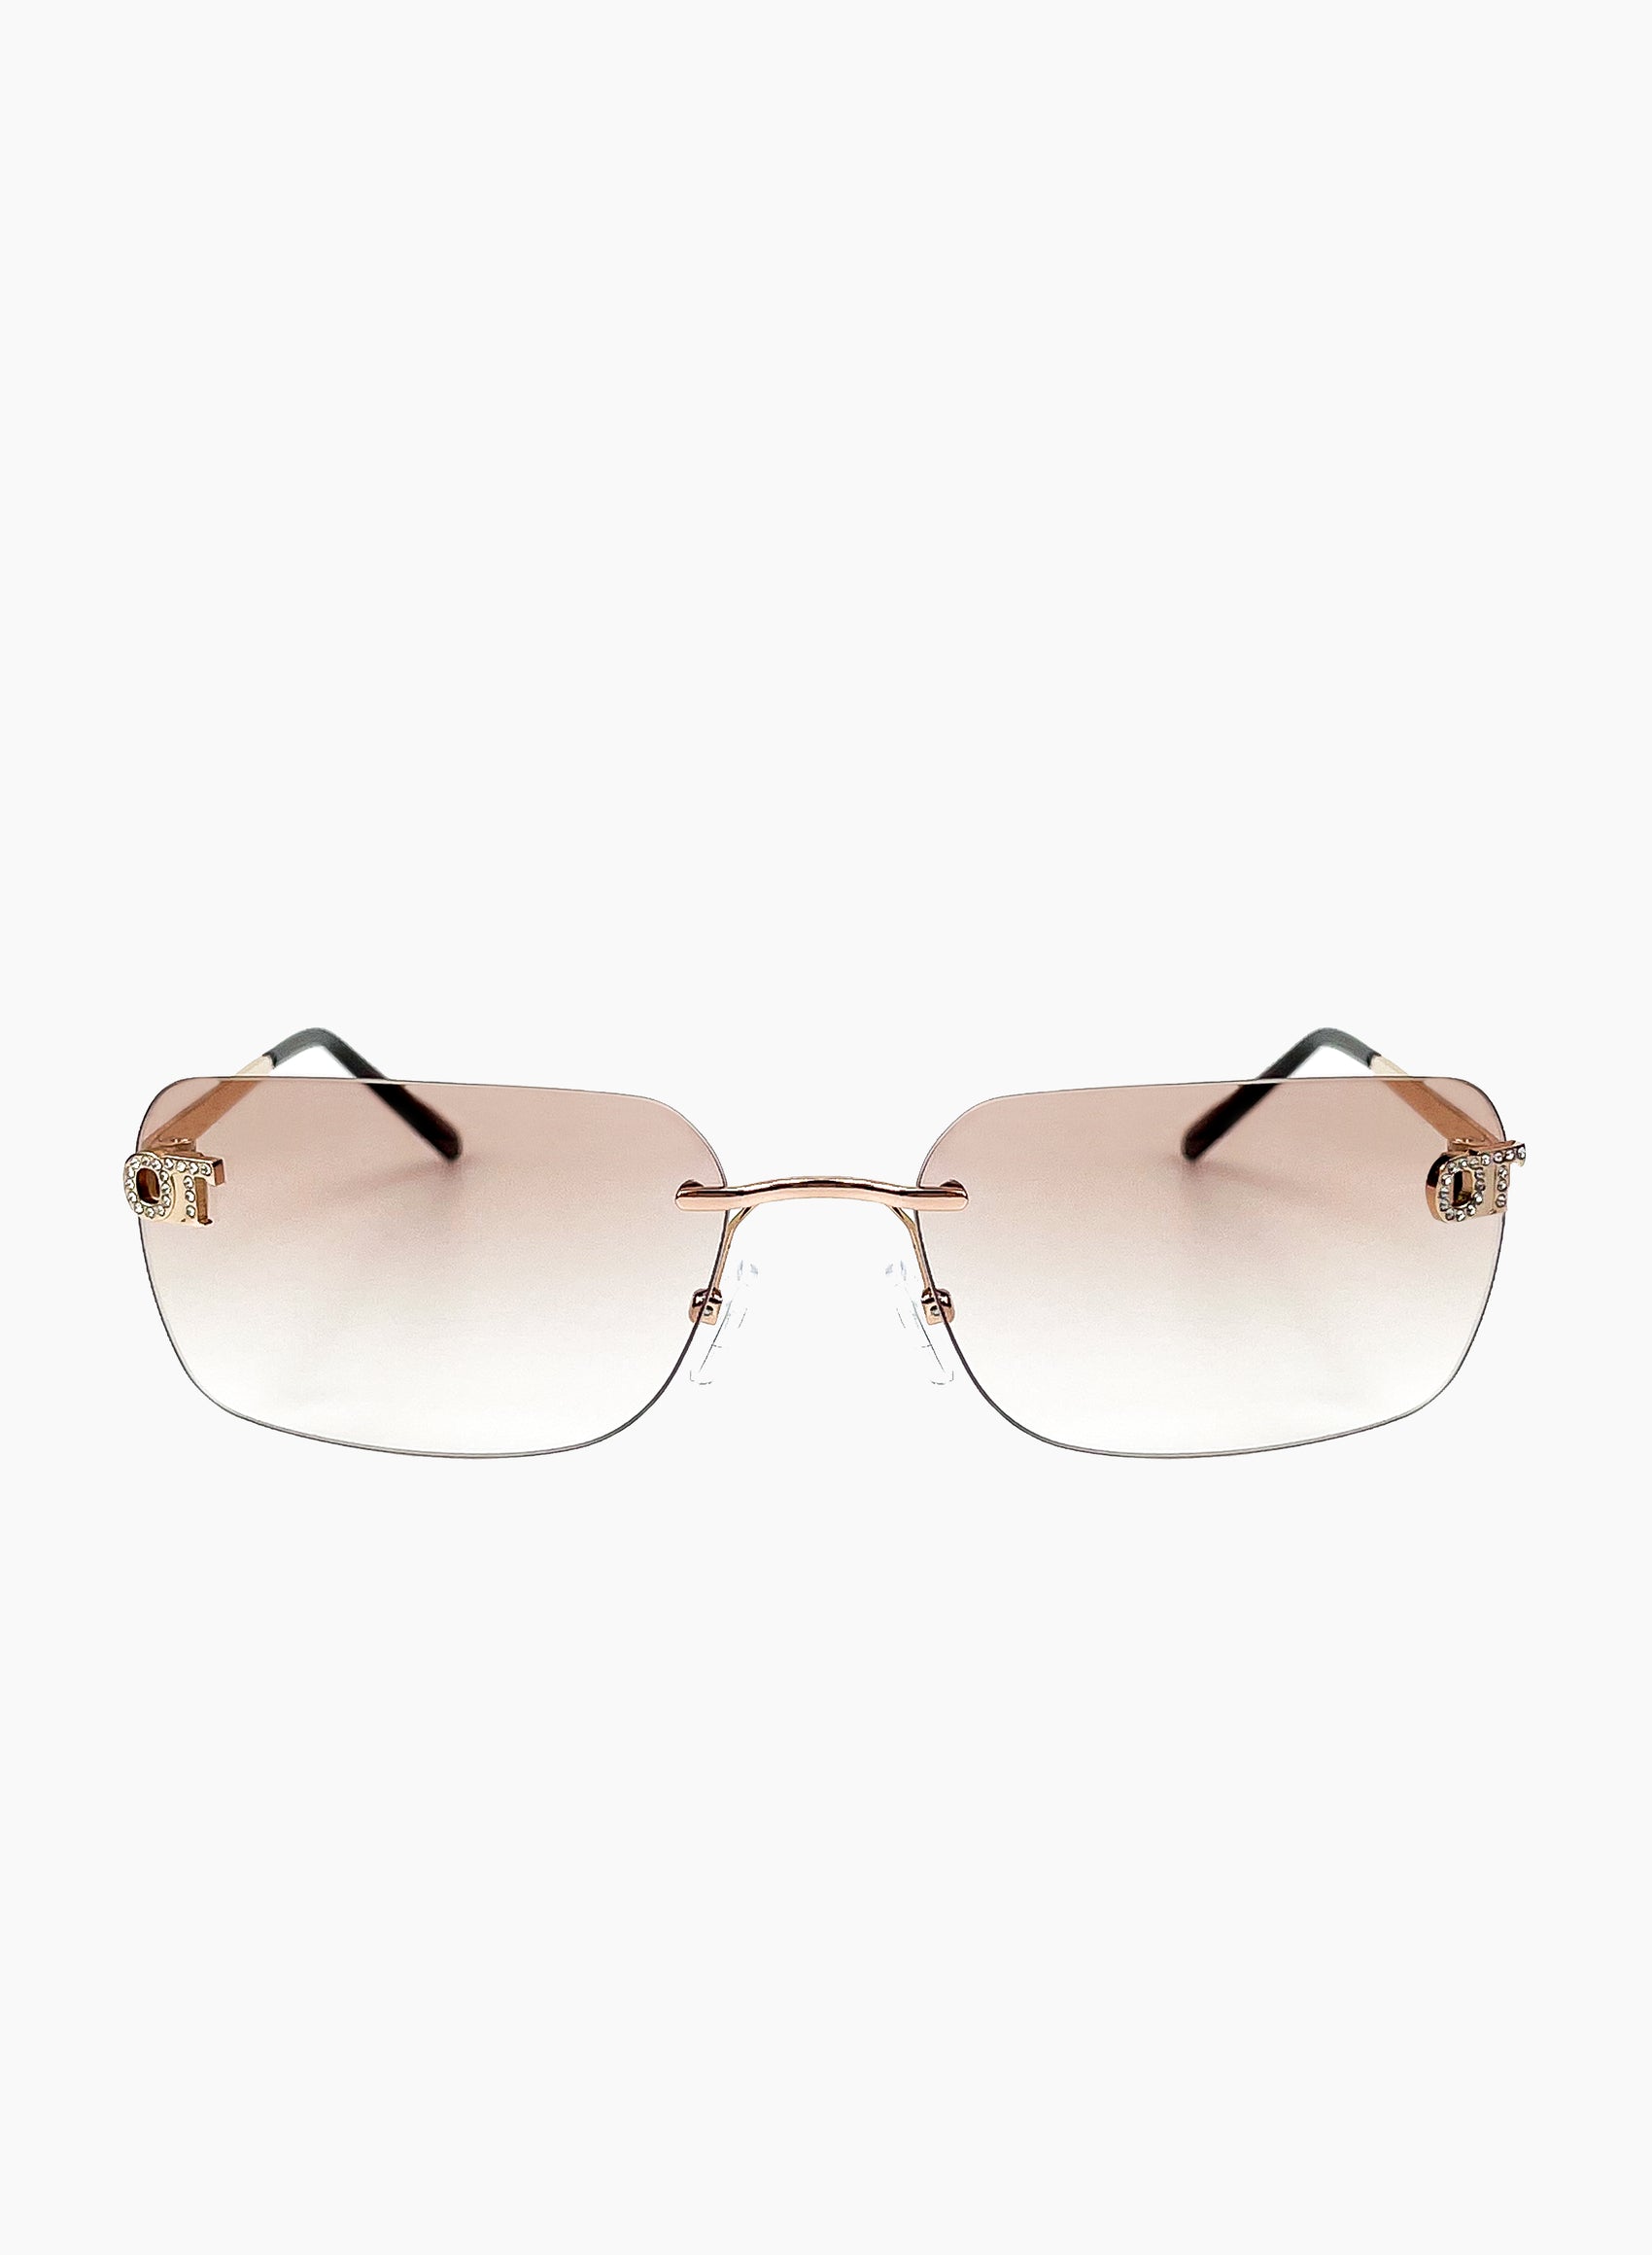 Cara sunglasses in gold frame with brown lenses